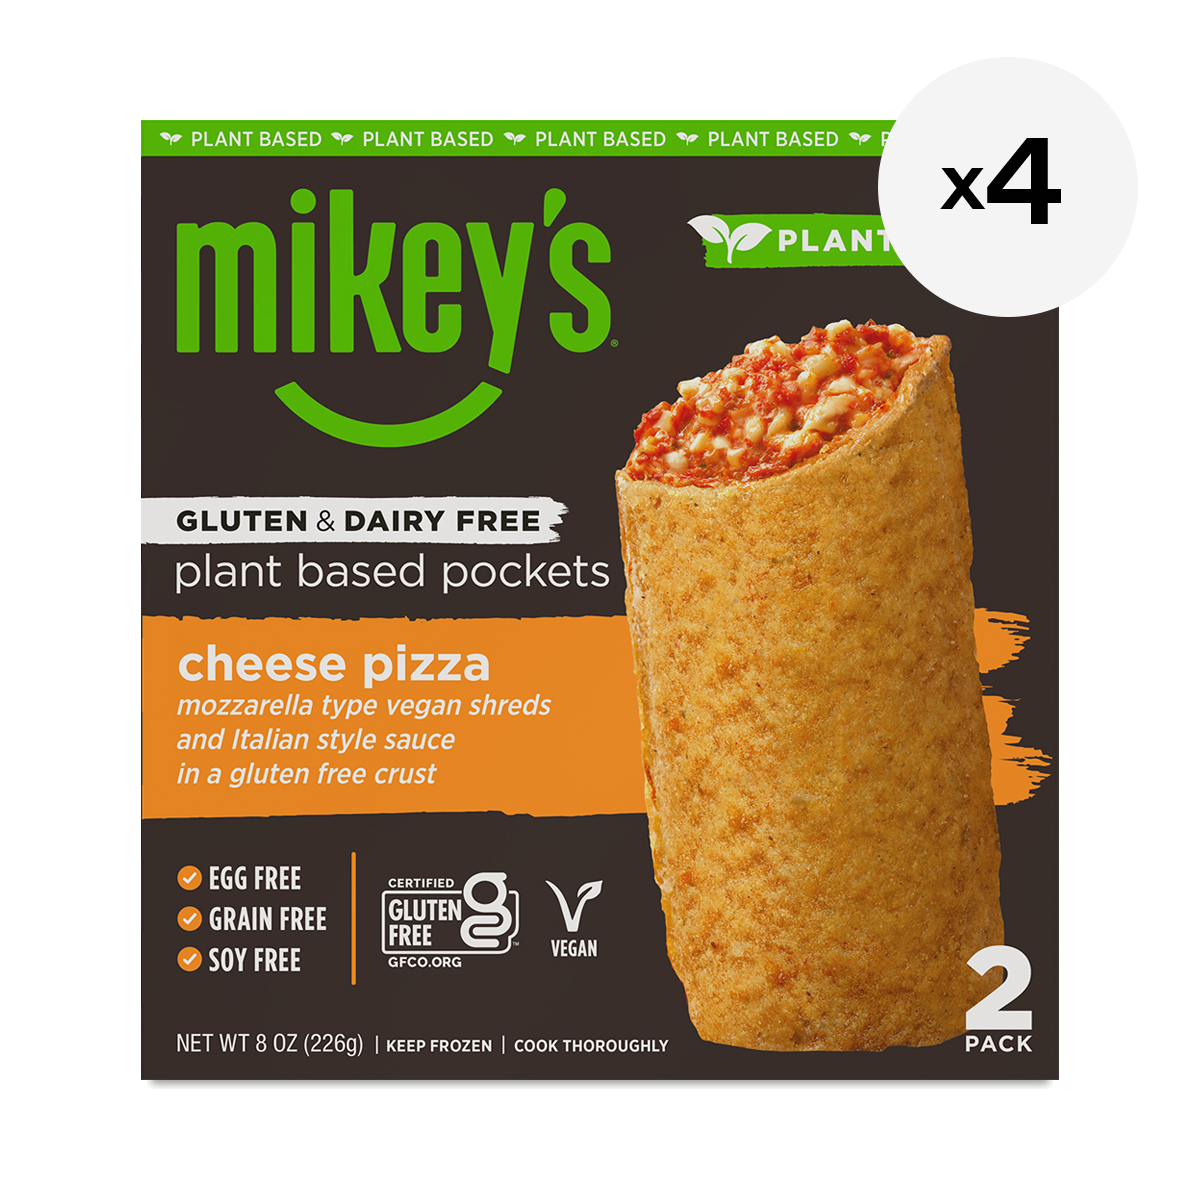 Mikey's Cheese Pizza Pockets, 4 Pack 4 x 8 oz boxes